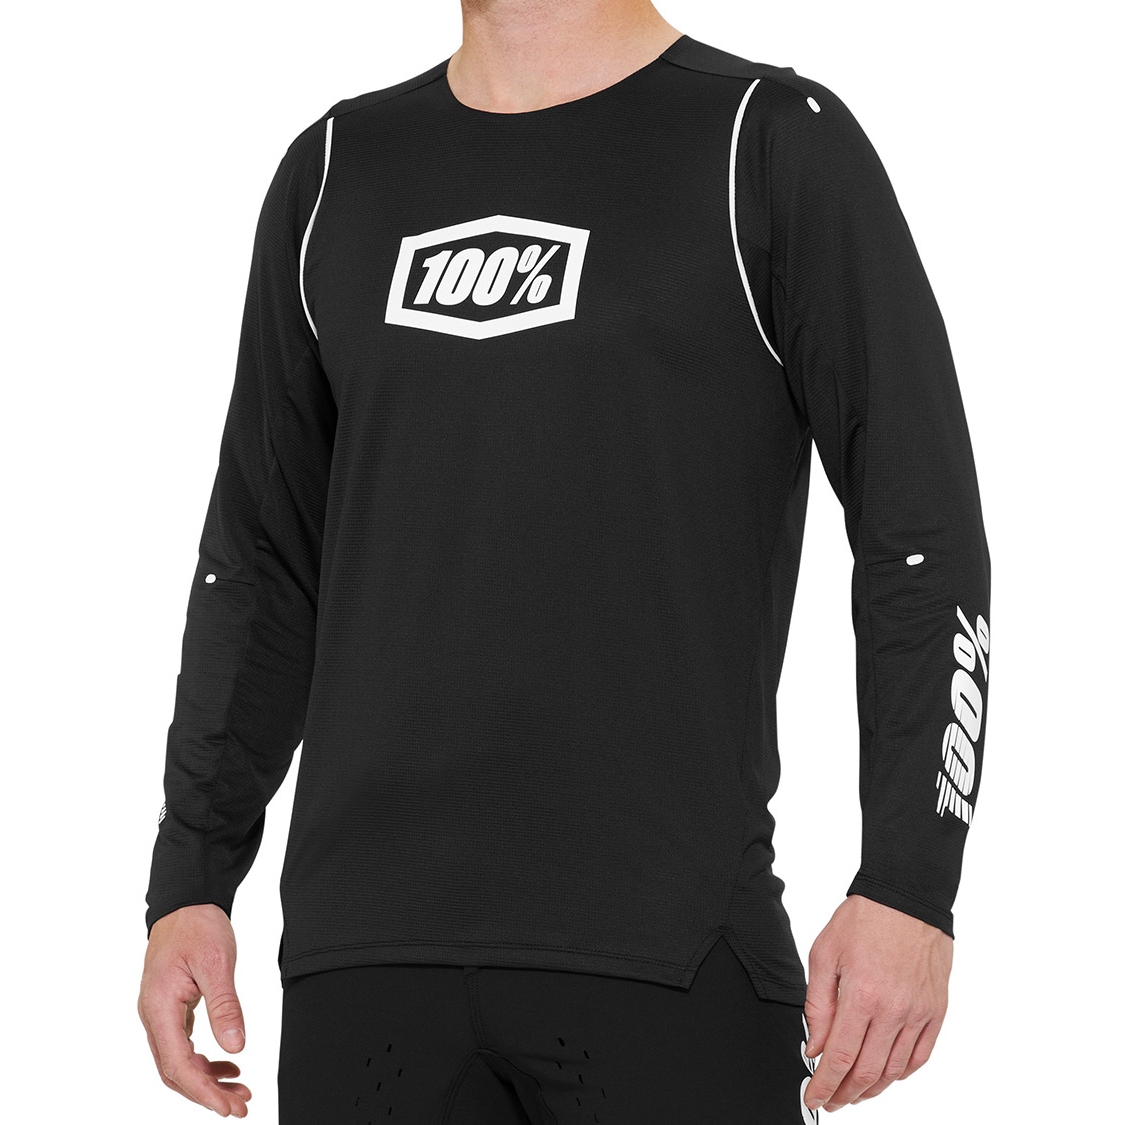 Picture of 100% R-Core X Long Sleeve Jersey Men - black